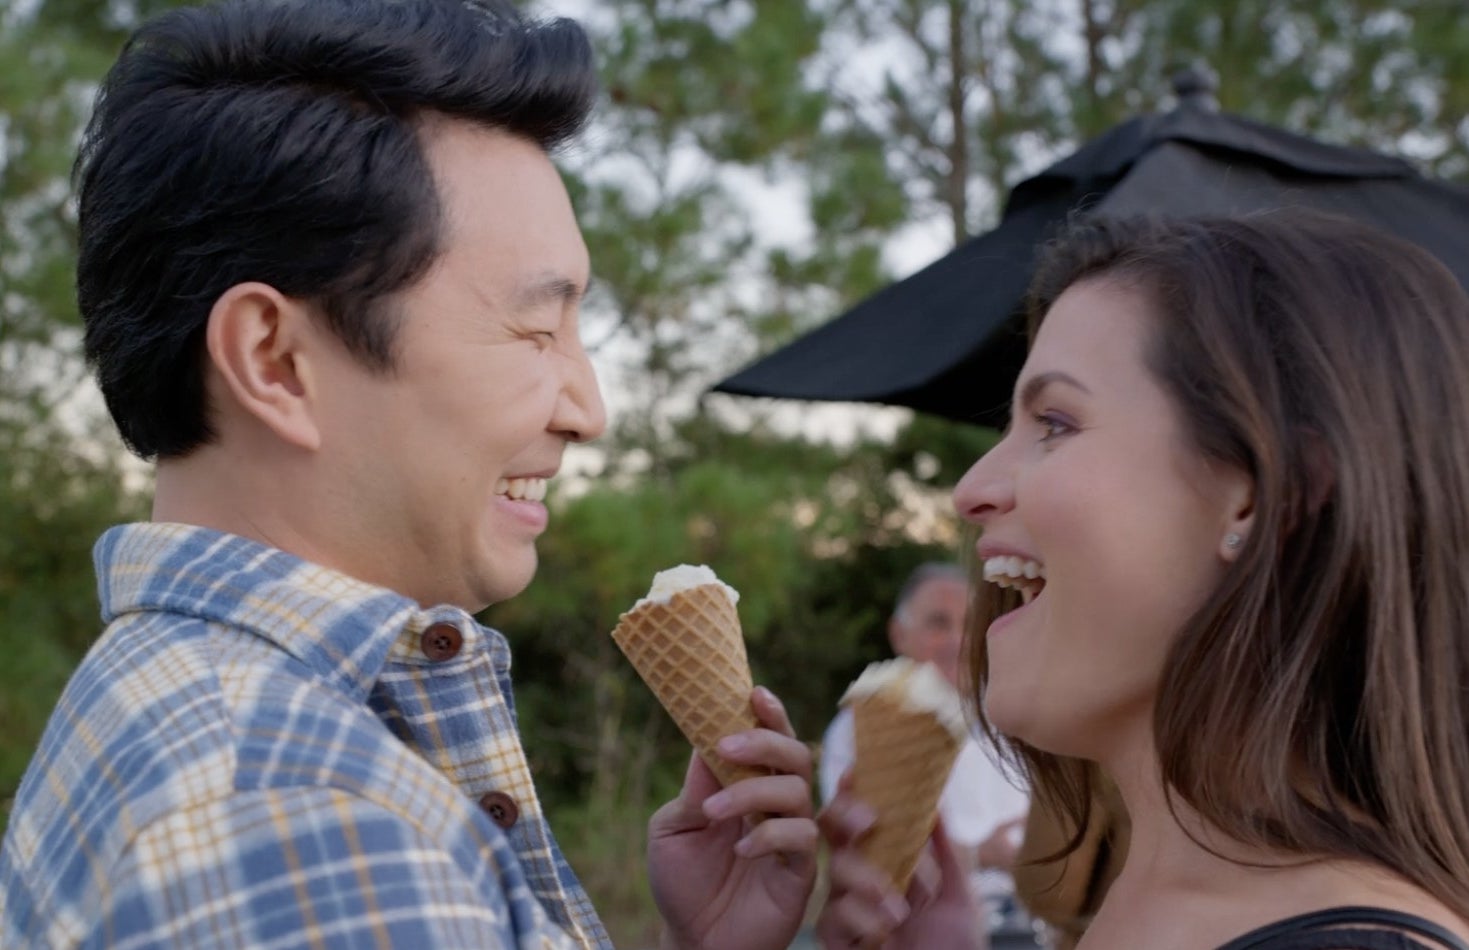 A man and a woman share ice cream cones, laughing.